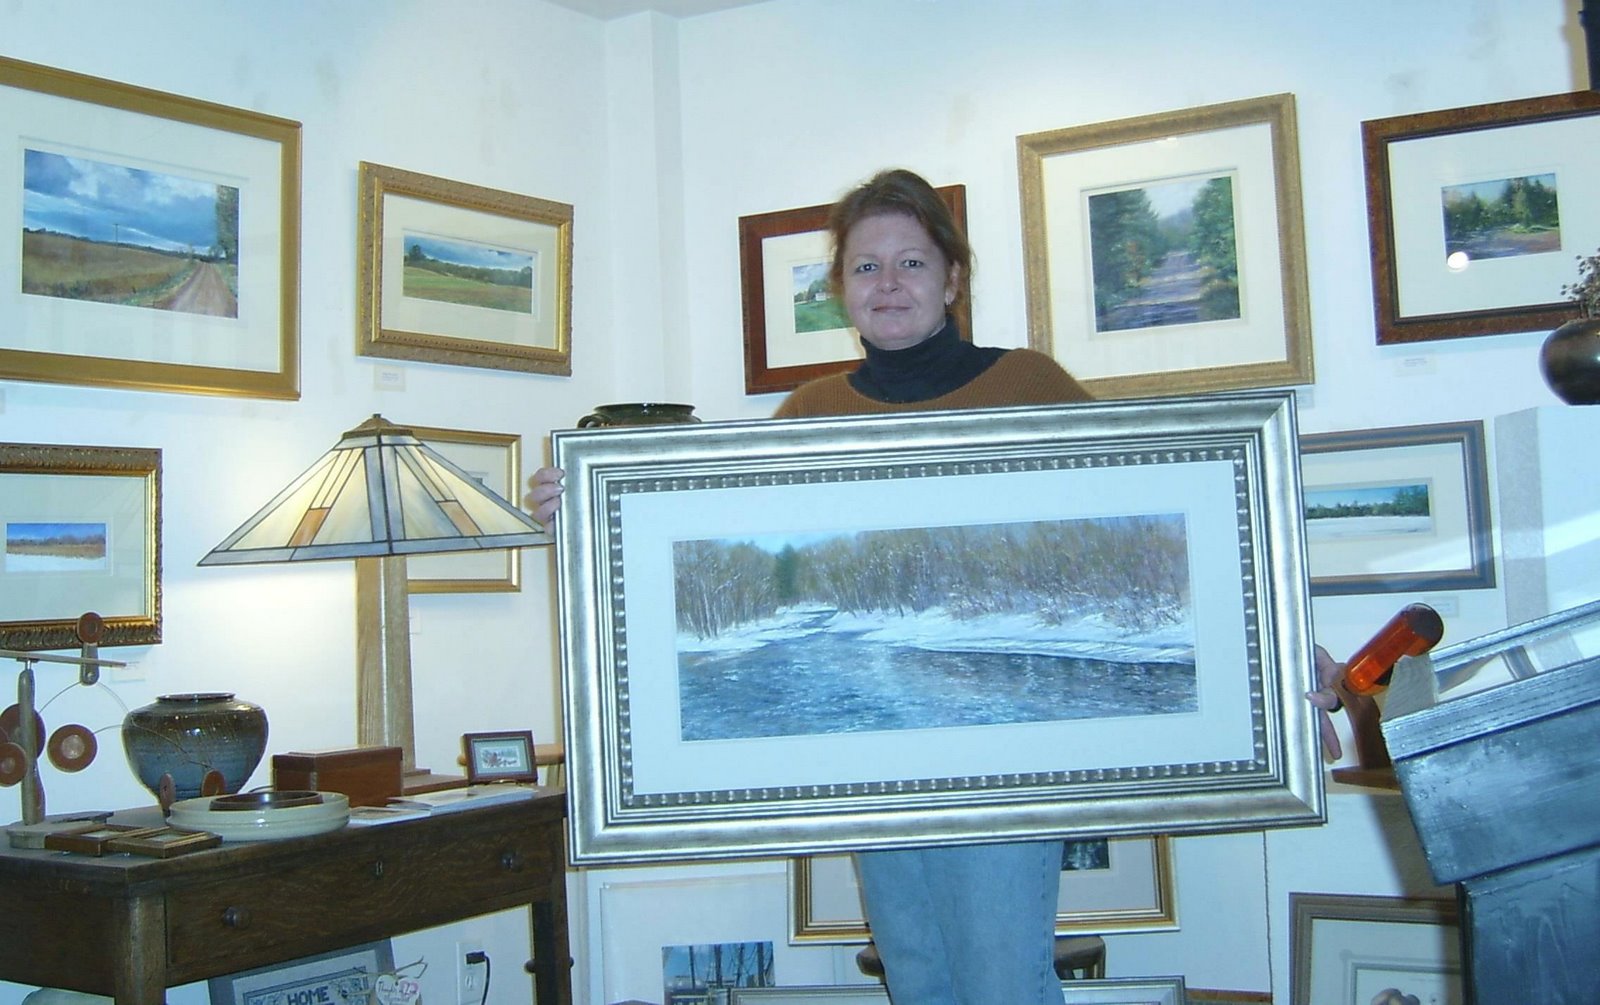 In the gallery holding "Salmon River"